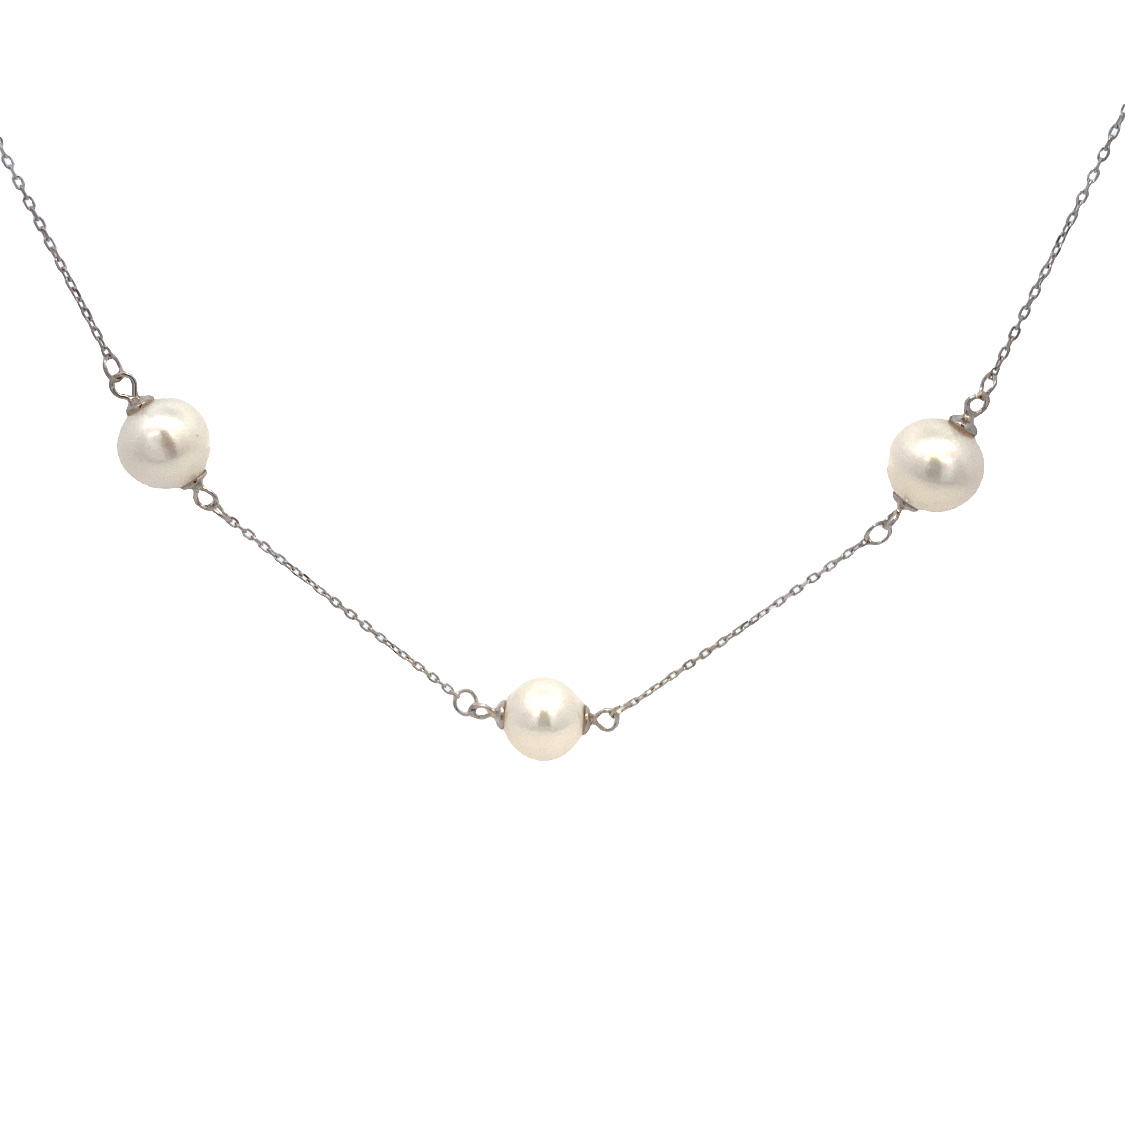 Sterling Silver Pearl Necklace Having 11 White Freshwater Pearl Stations Measuring 24.5